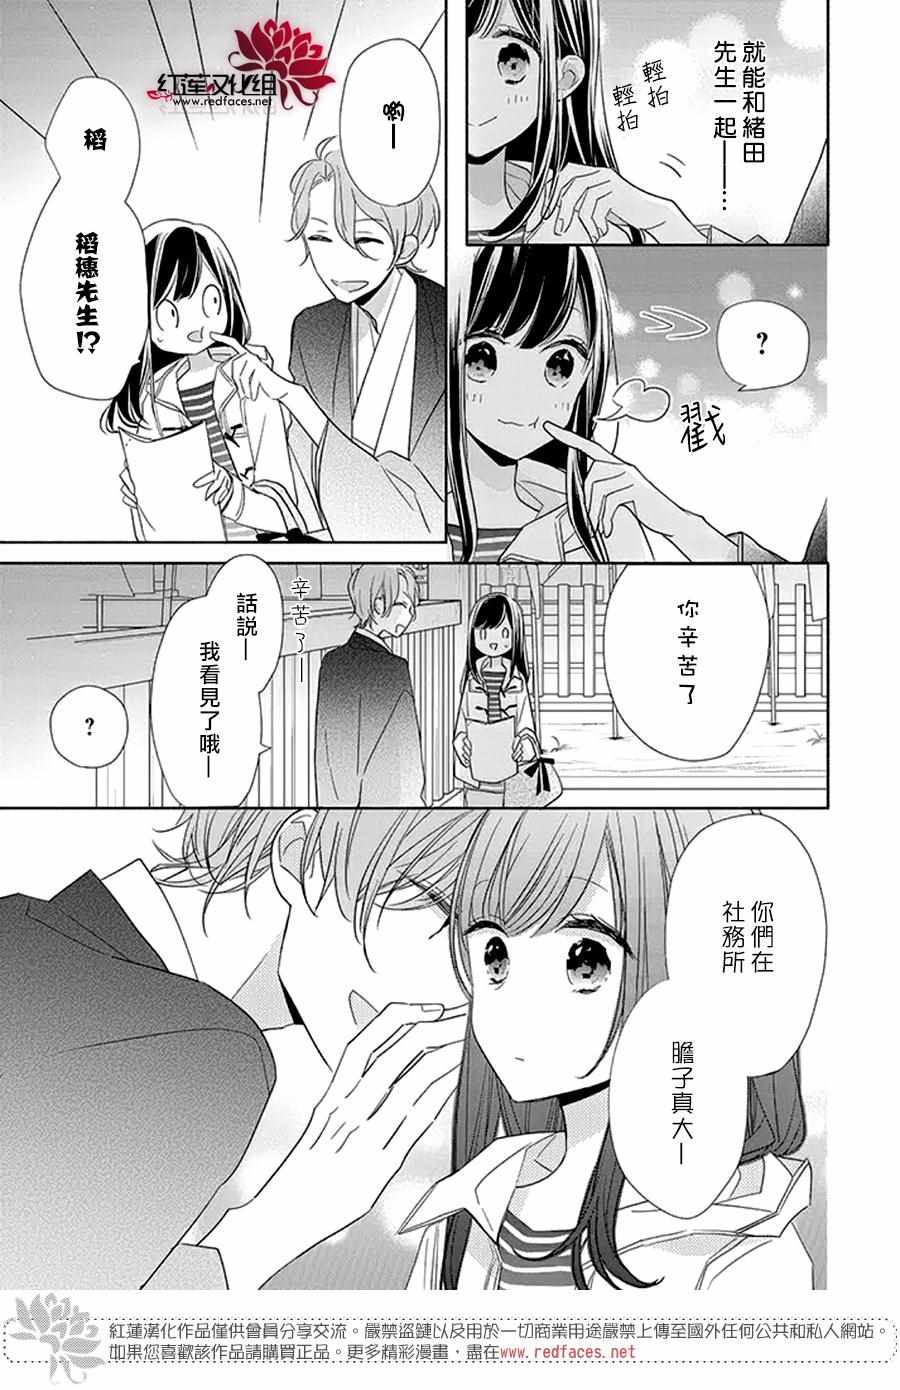 《If given a second chance》漫画 second chance 023集